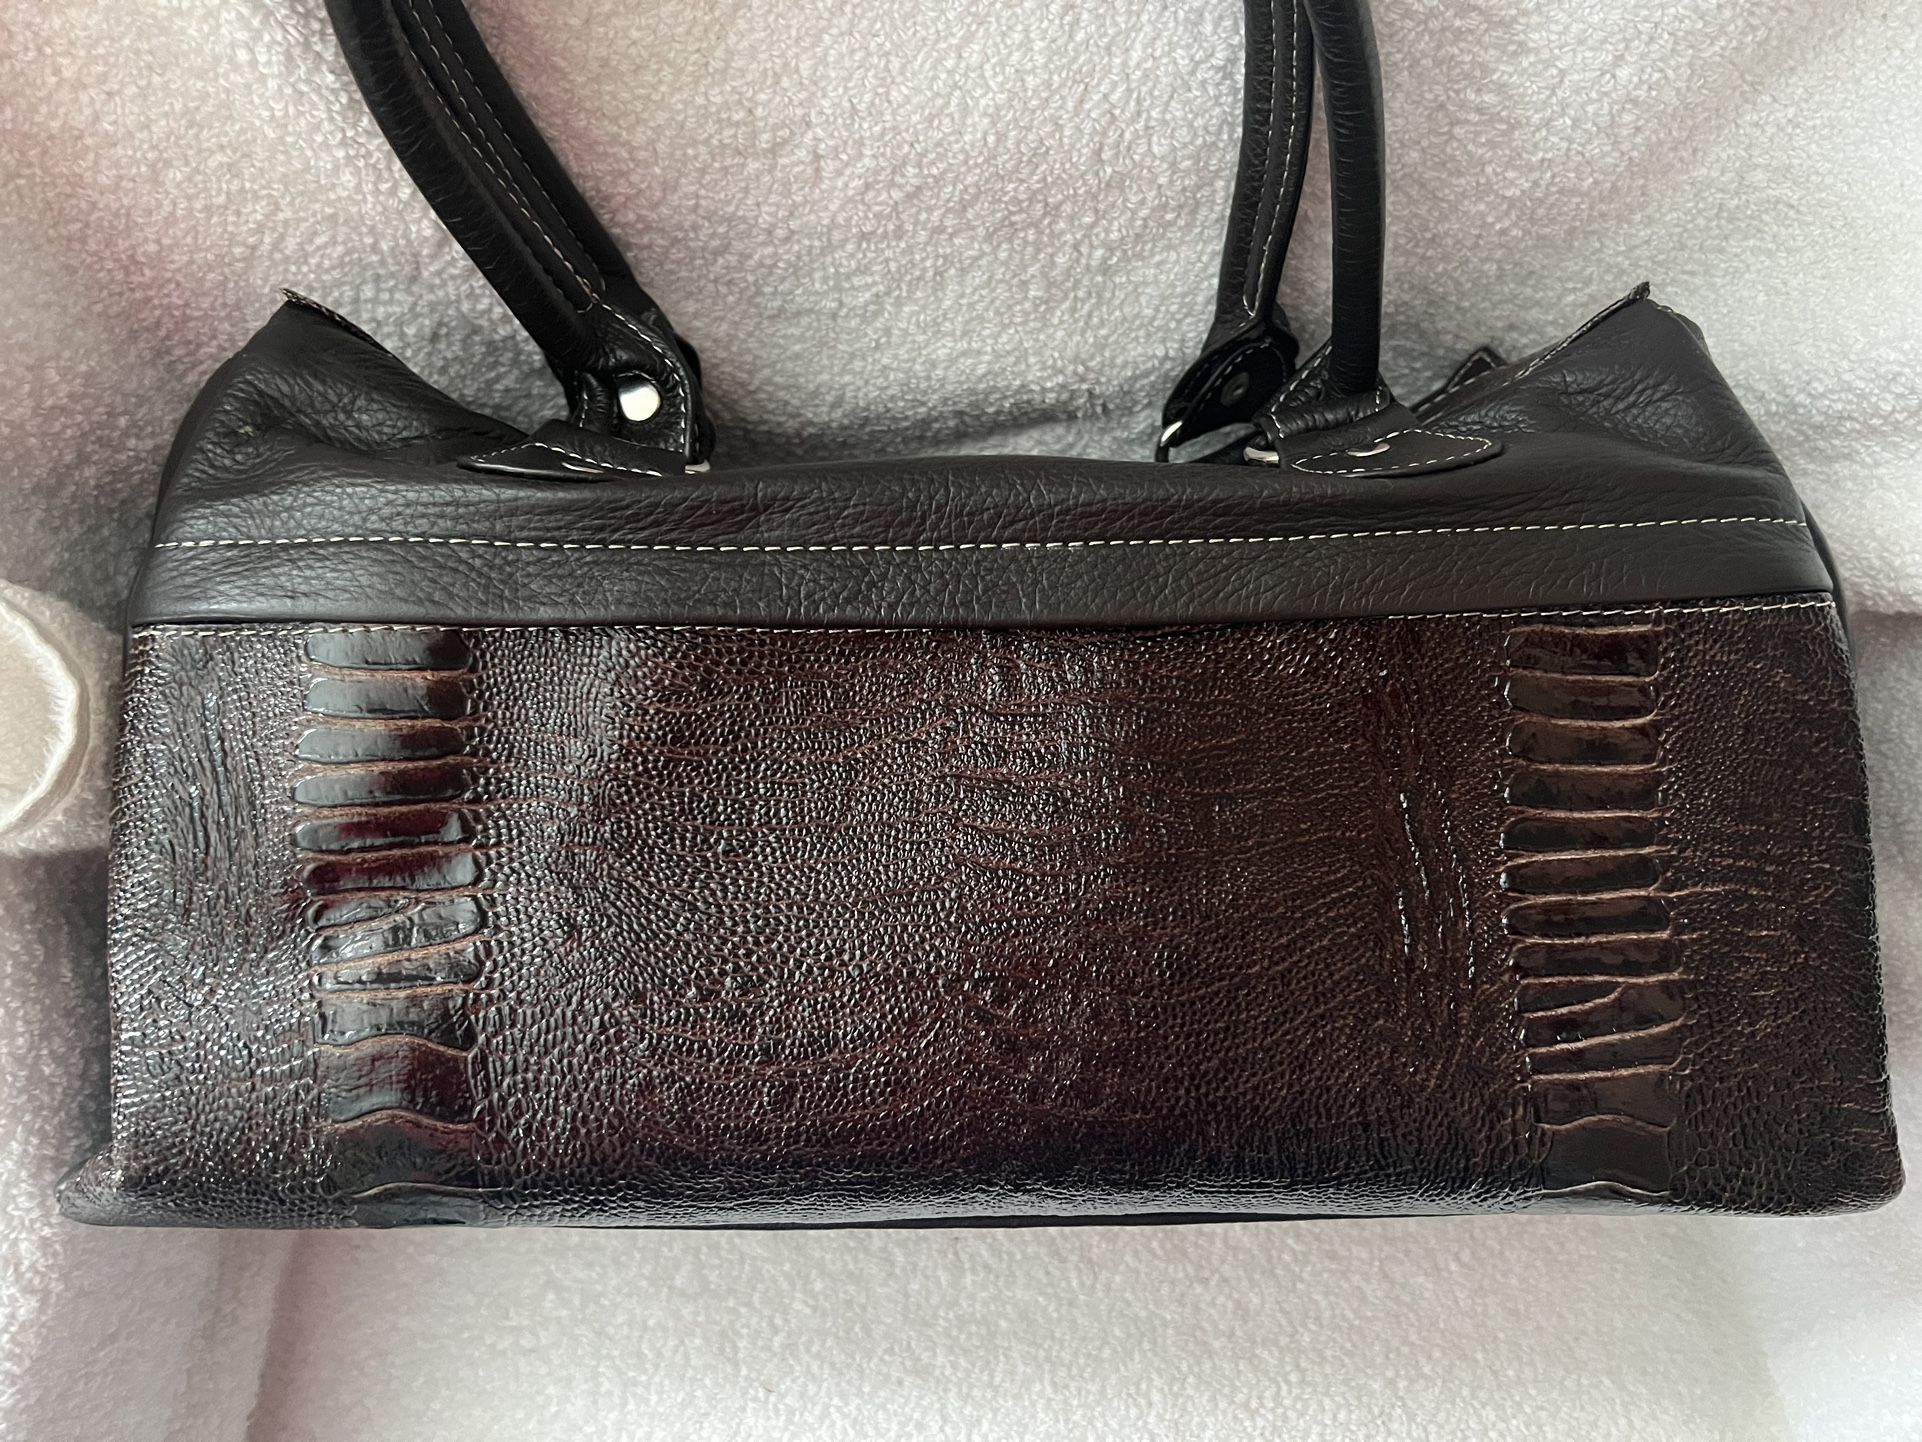 Leather Handbag- Made In Mexico